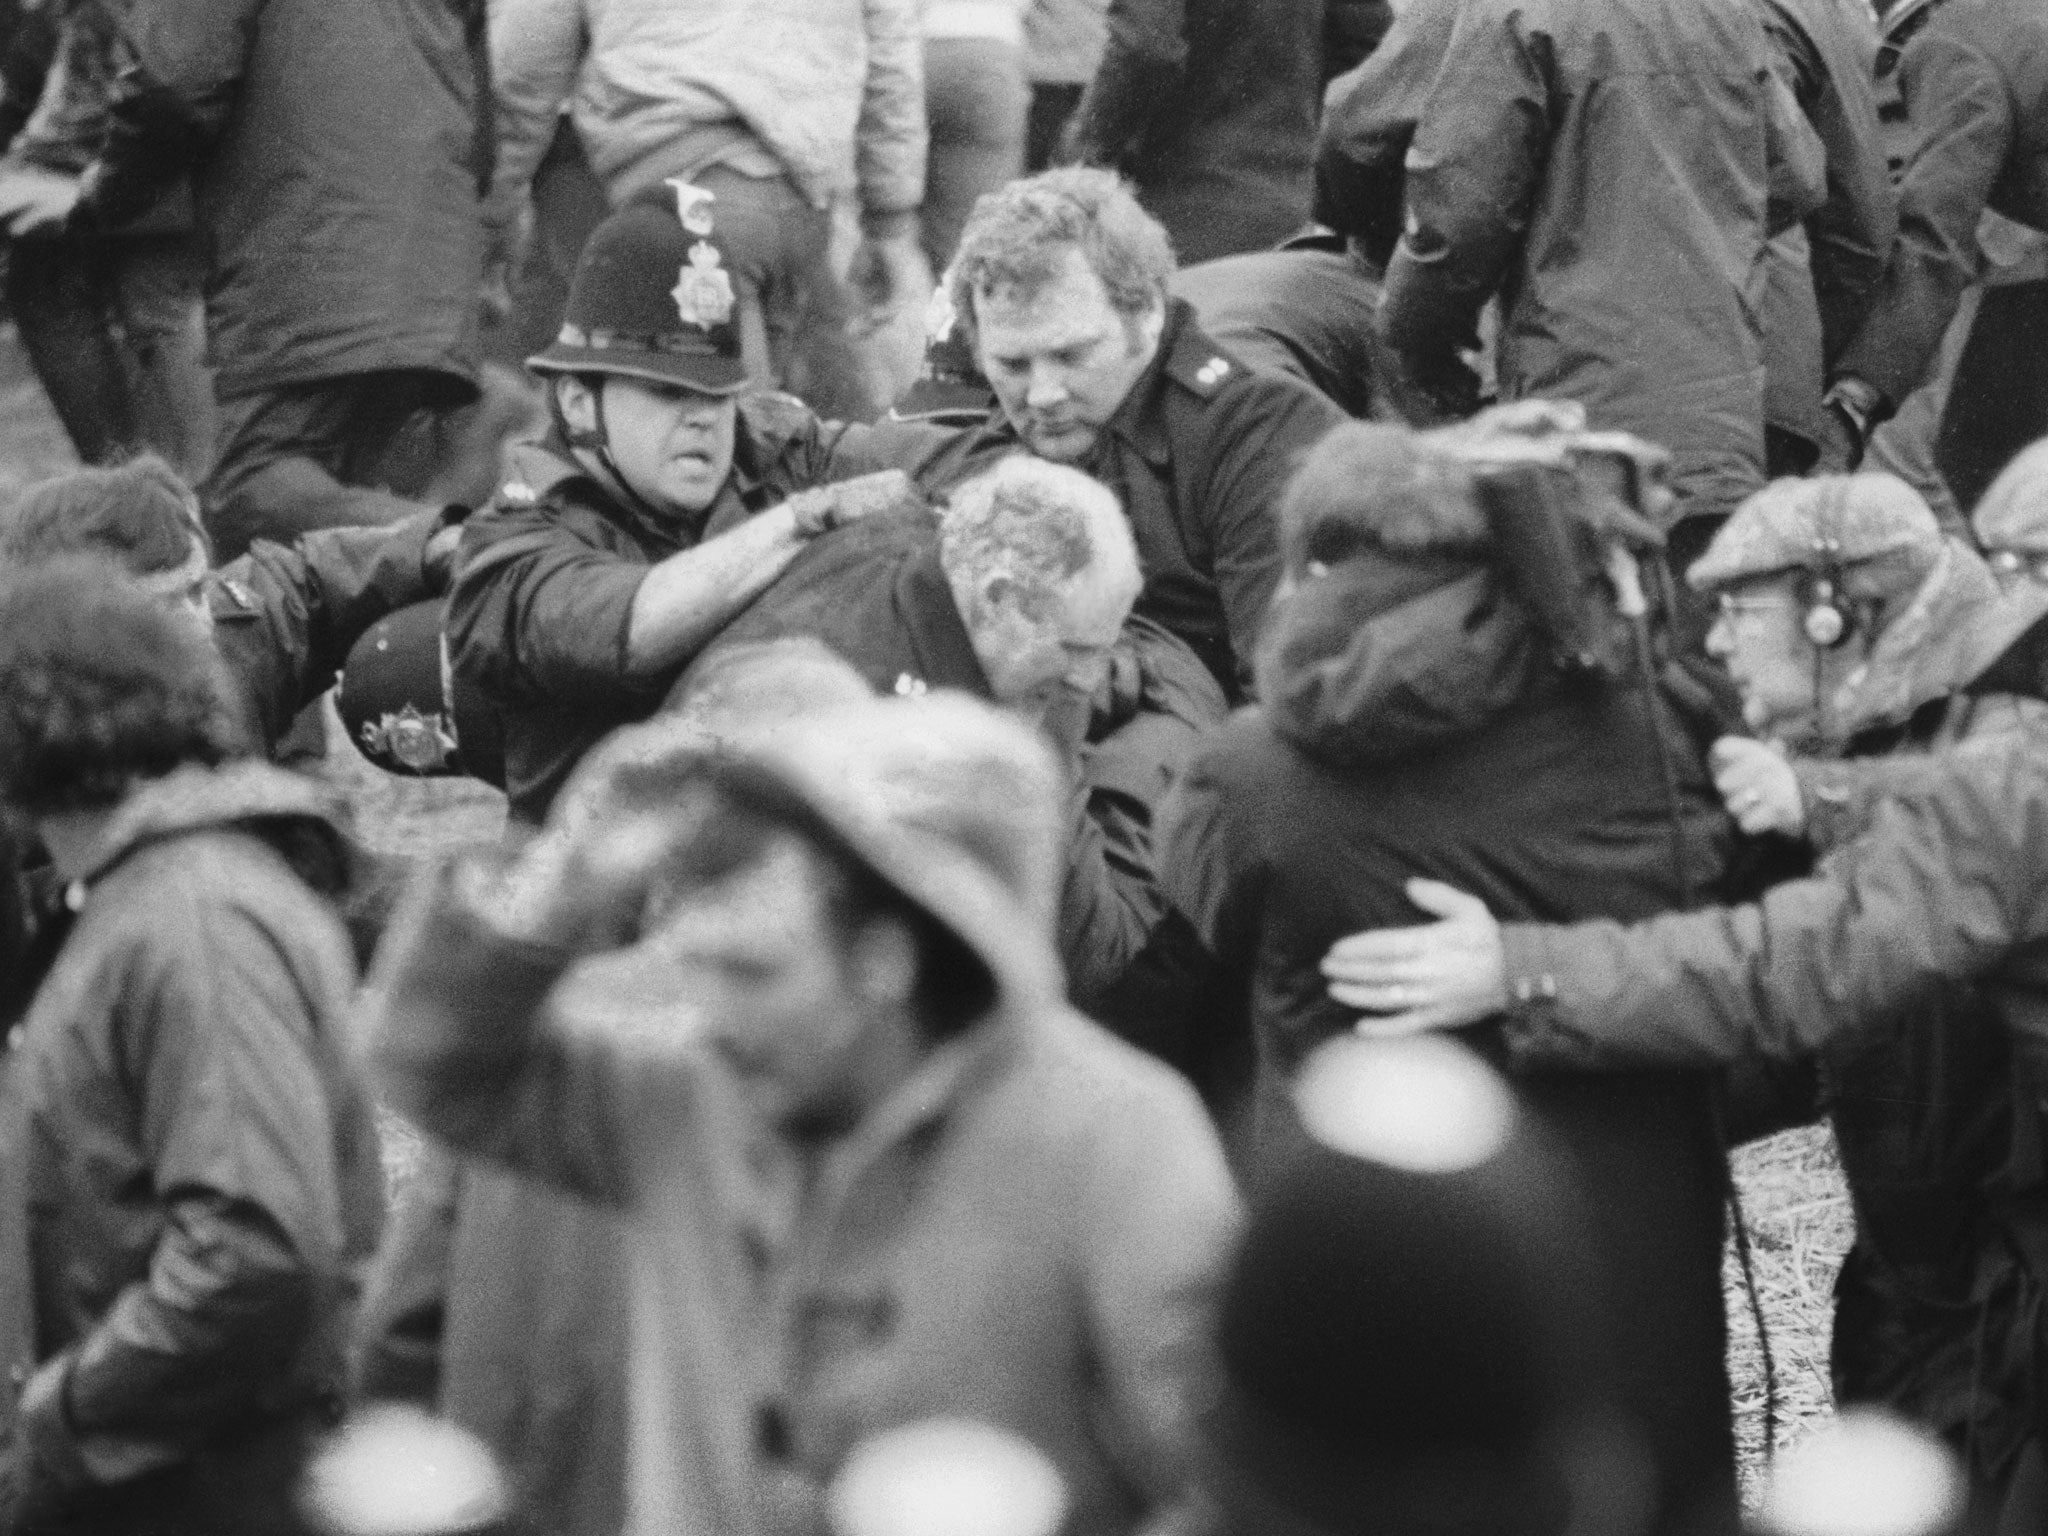 A camera crew fims a scuffle between police and miners at a demonstration at Orgreave Colliery, South Yorkshire, during the miner's strike, 2nd June 1984 - All police forces in England and Wales have been asked to search their files over claims that offic